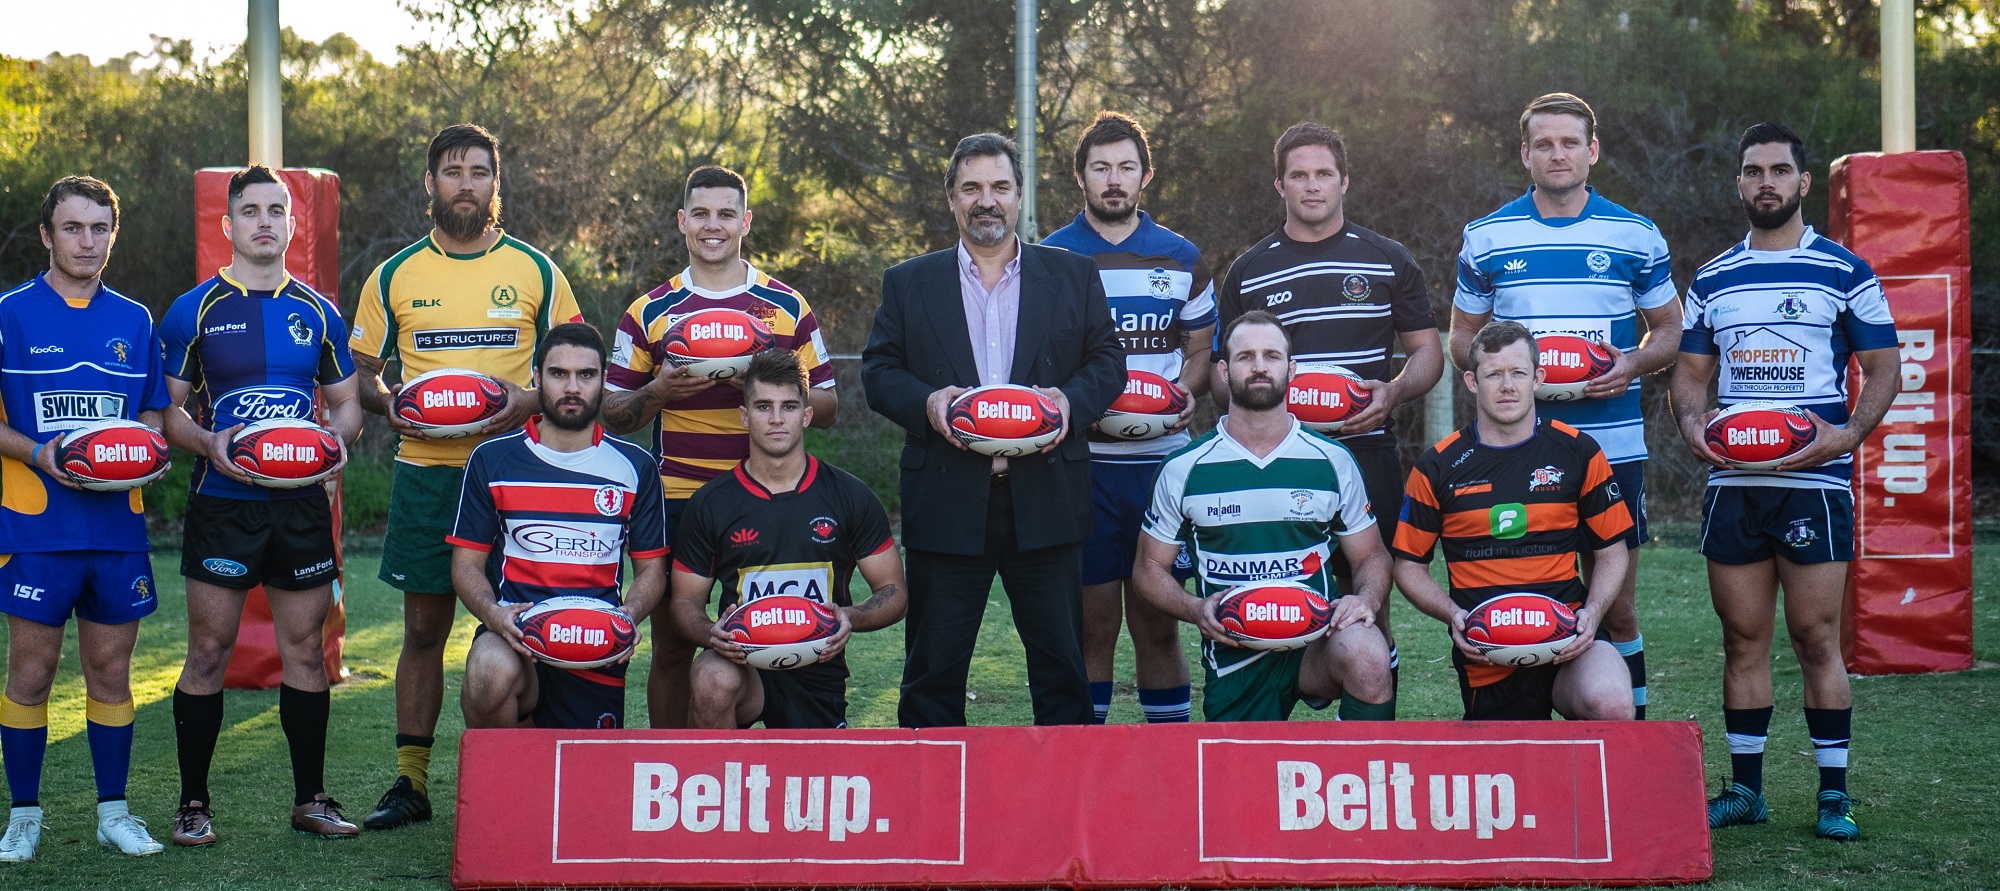  Deputy chief executive of the Insurance Commission Rick Howe with WA Premier Grade Captains promoting the Belt up partnership, March 2019